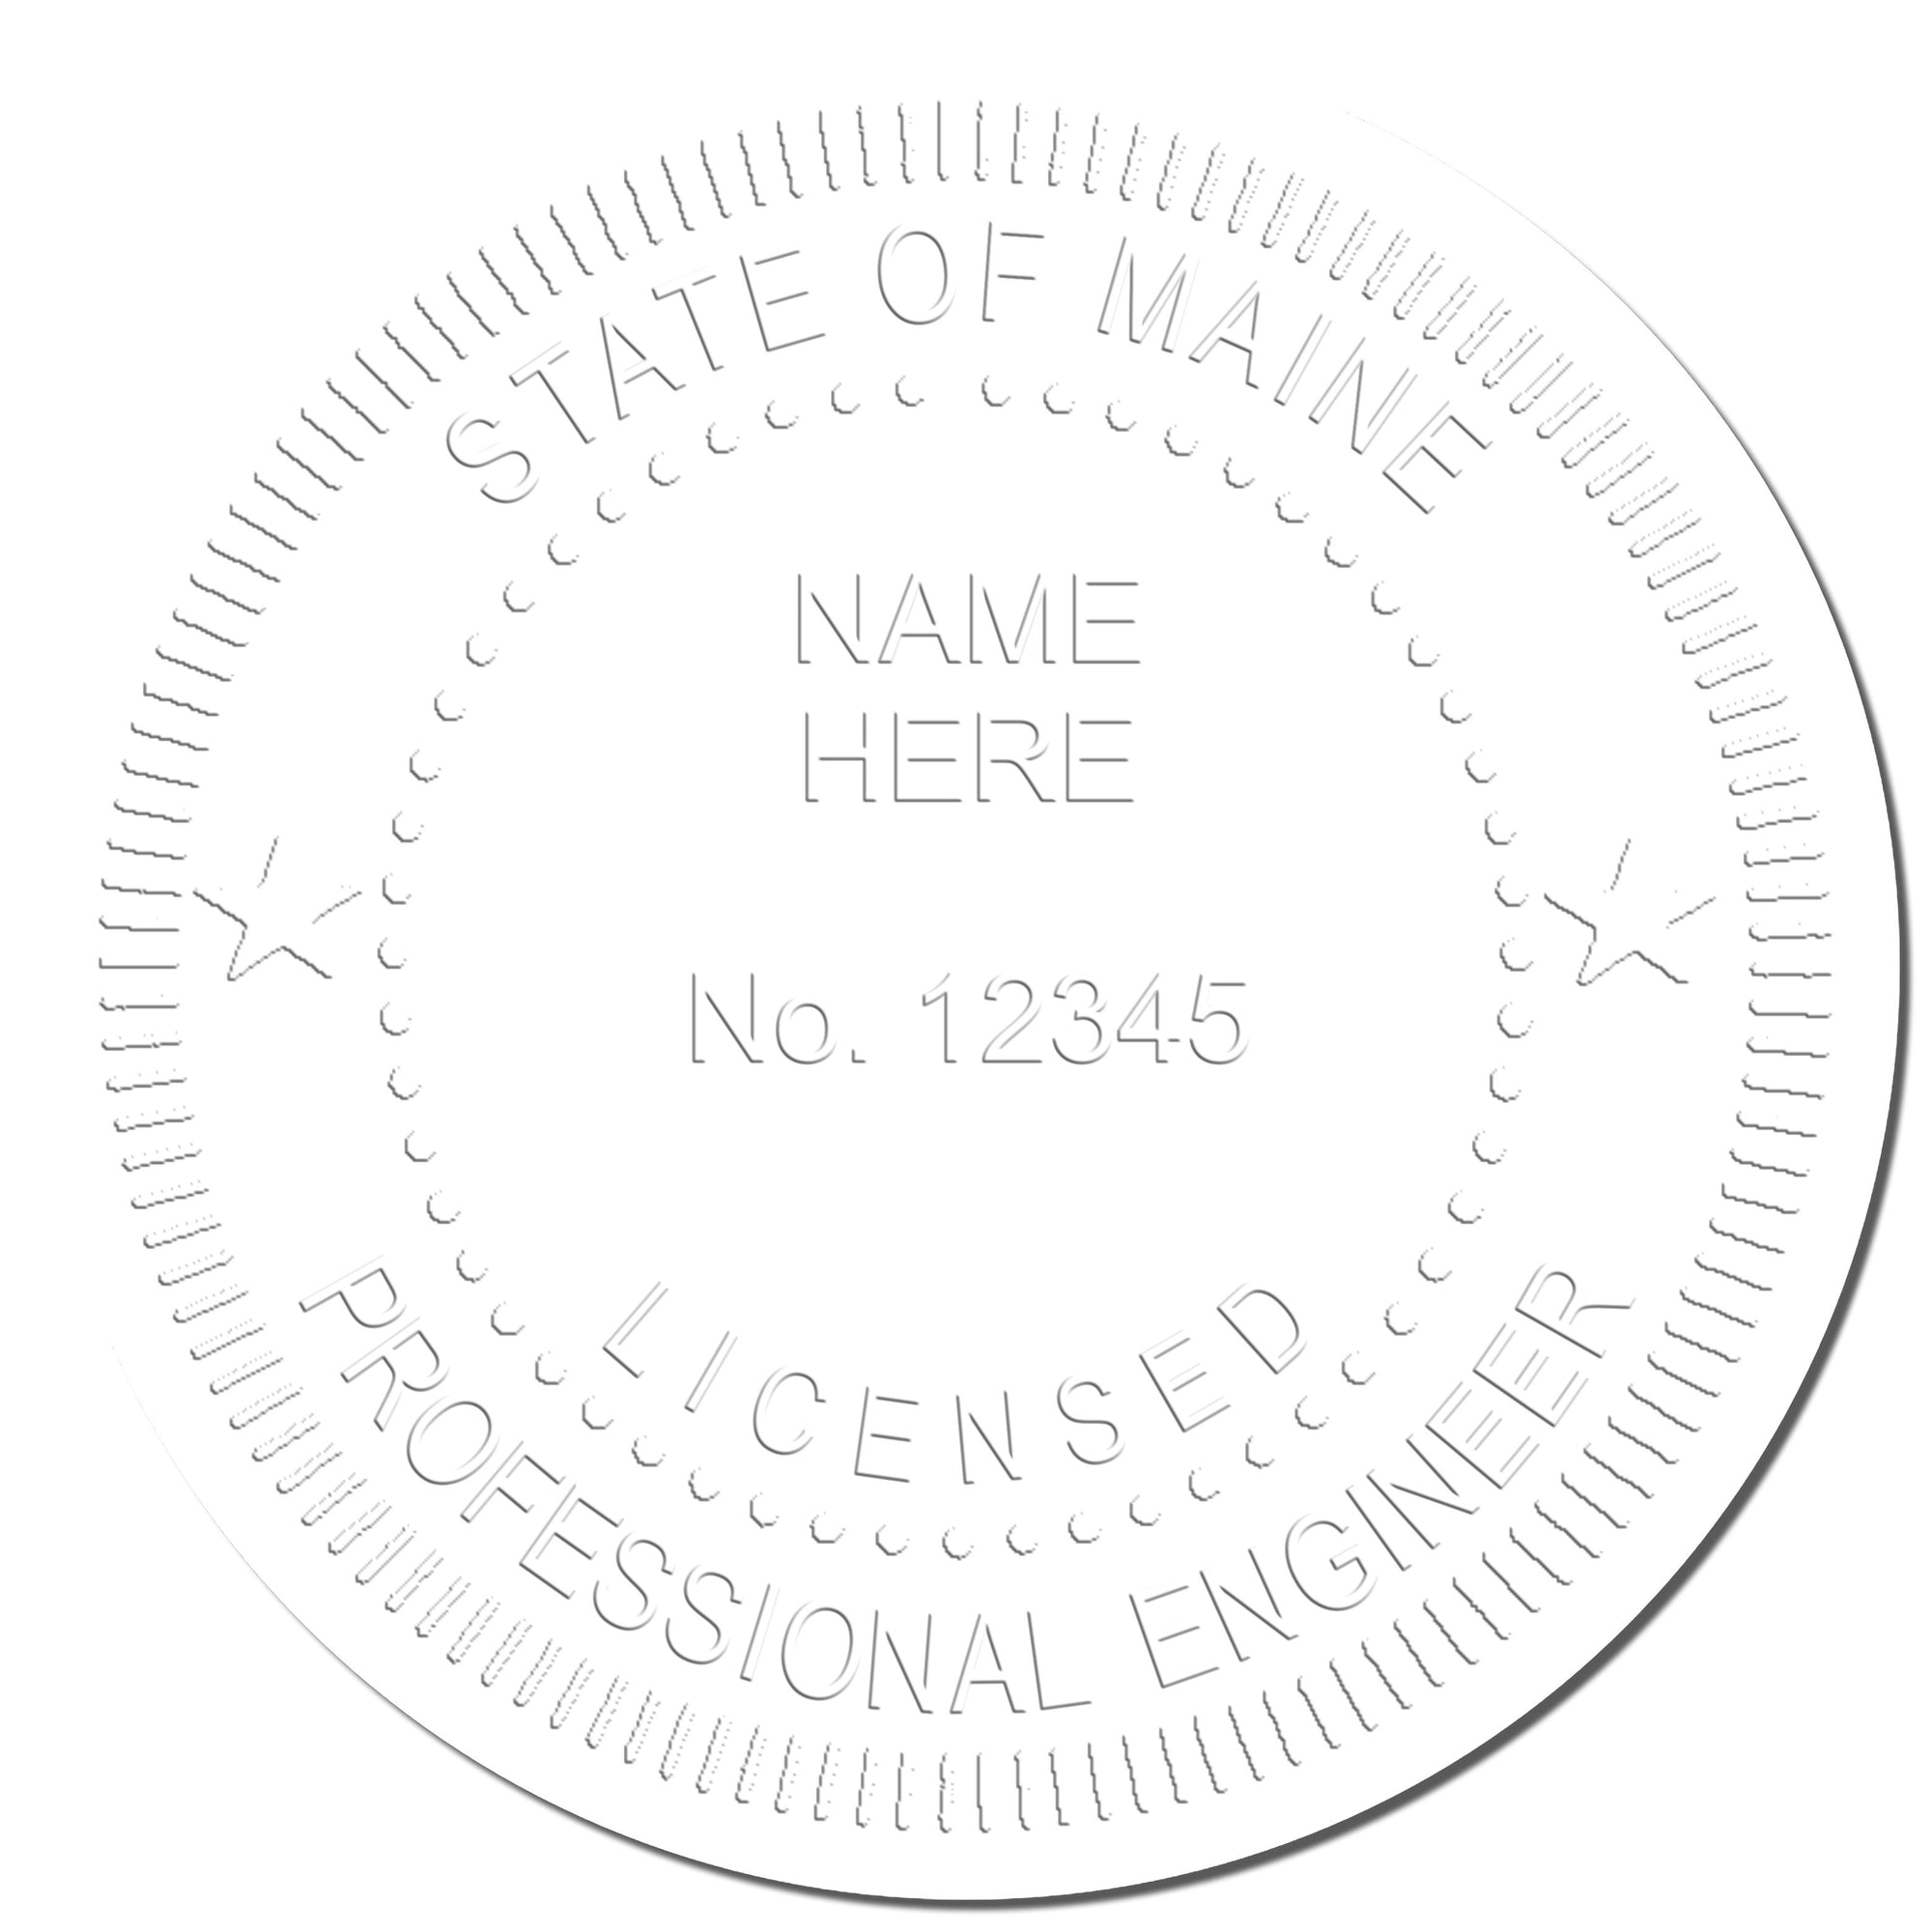 The main image for the Maine Engineer Desk Seal depicting a sample of the imprint and electronic files